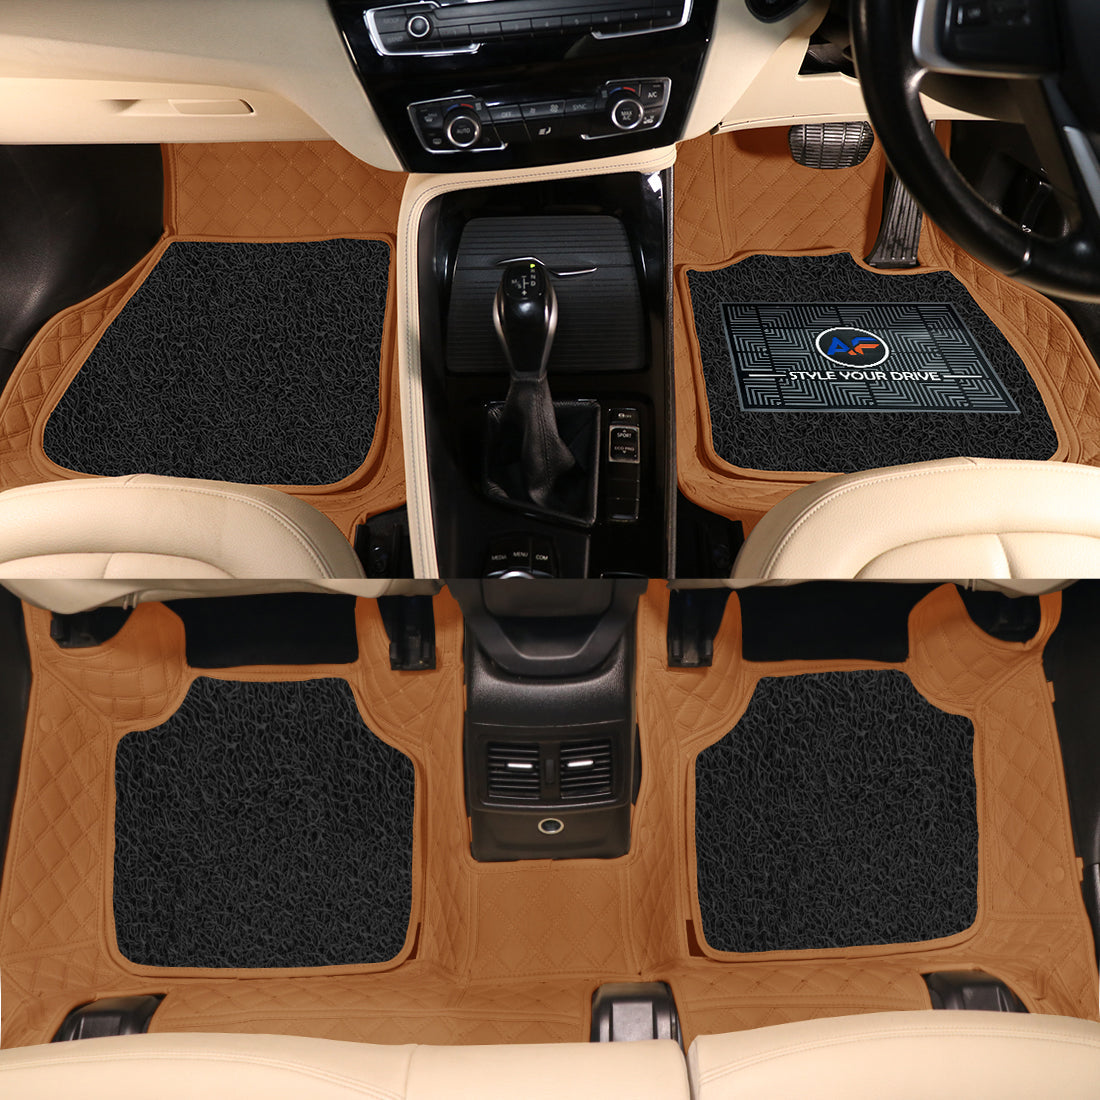 Hyundai i20 2014-19-7D Luxury Car Mat, All Weather Proof, Anti-Skid, 100% Waterproof & Odorless with Unique Diamond Fish Design (24mm Luxury PU Leather, 2 Rows)